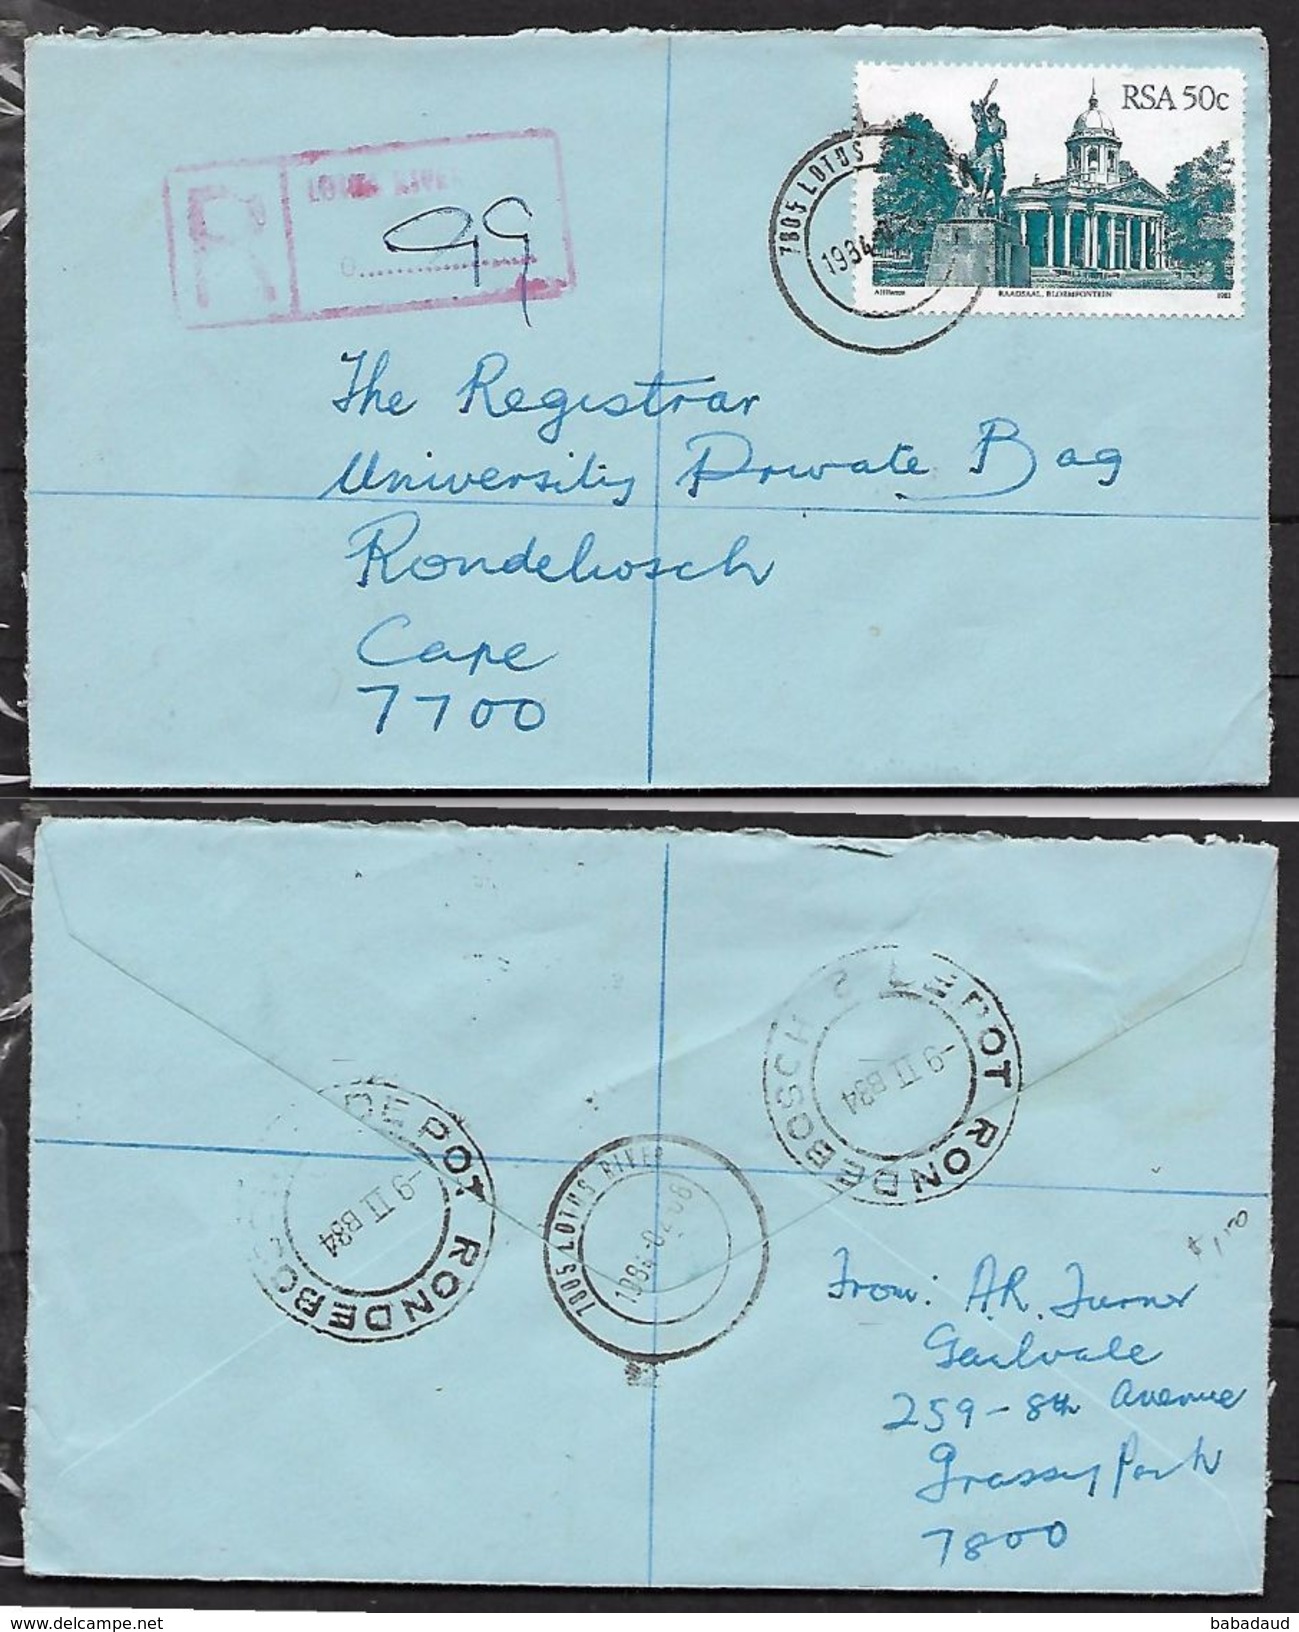 S.Africa, Registered Domestic Letter, 50c, LOTUS RIVER1984 02 08 > RONDEBOSCH DEPOT 9 II84 - Lettres & Documents